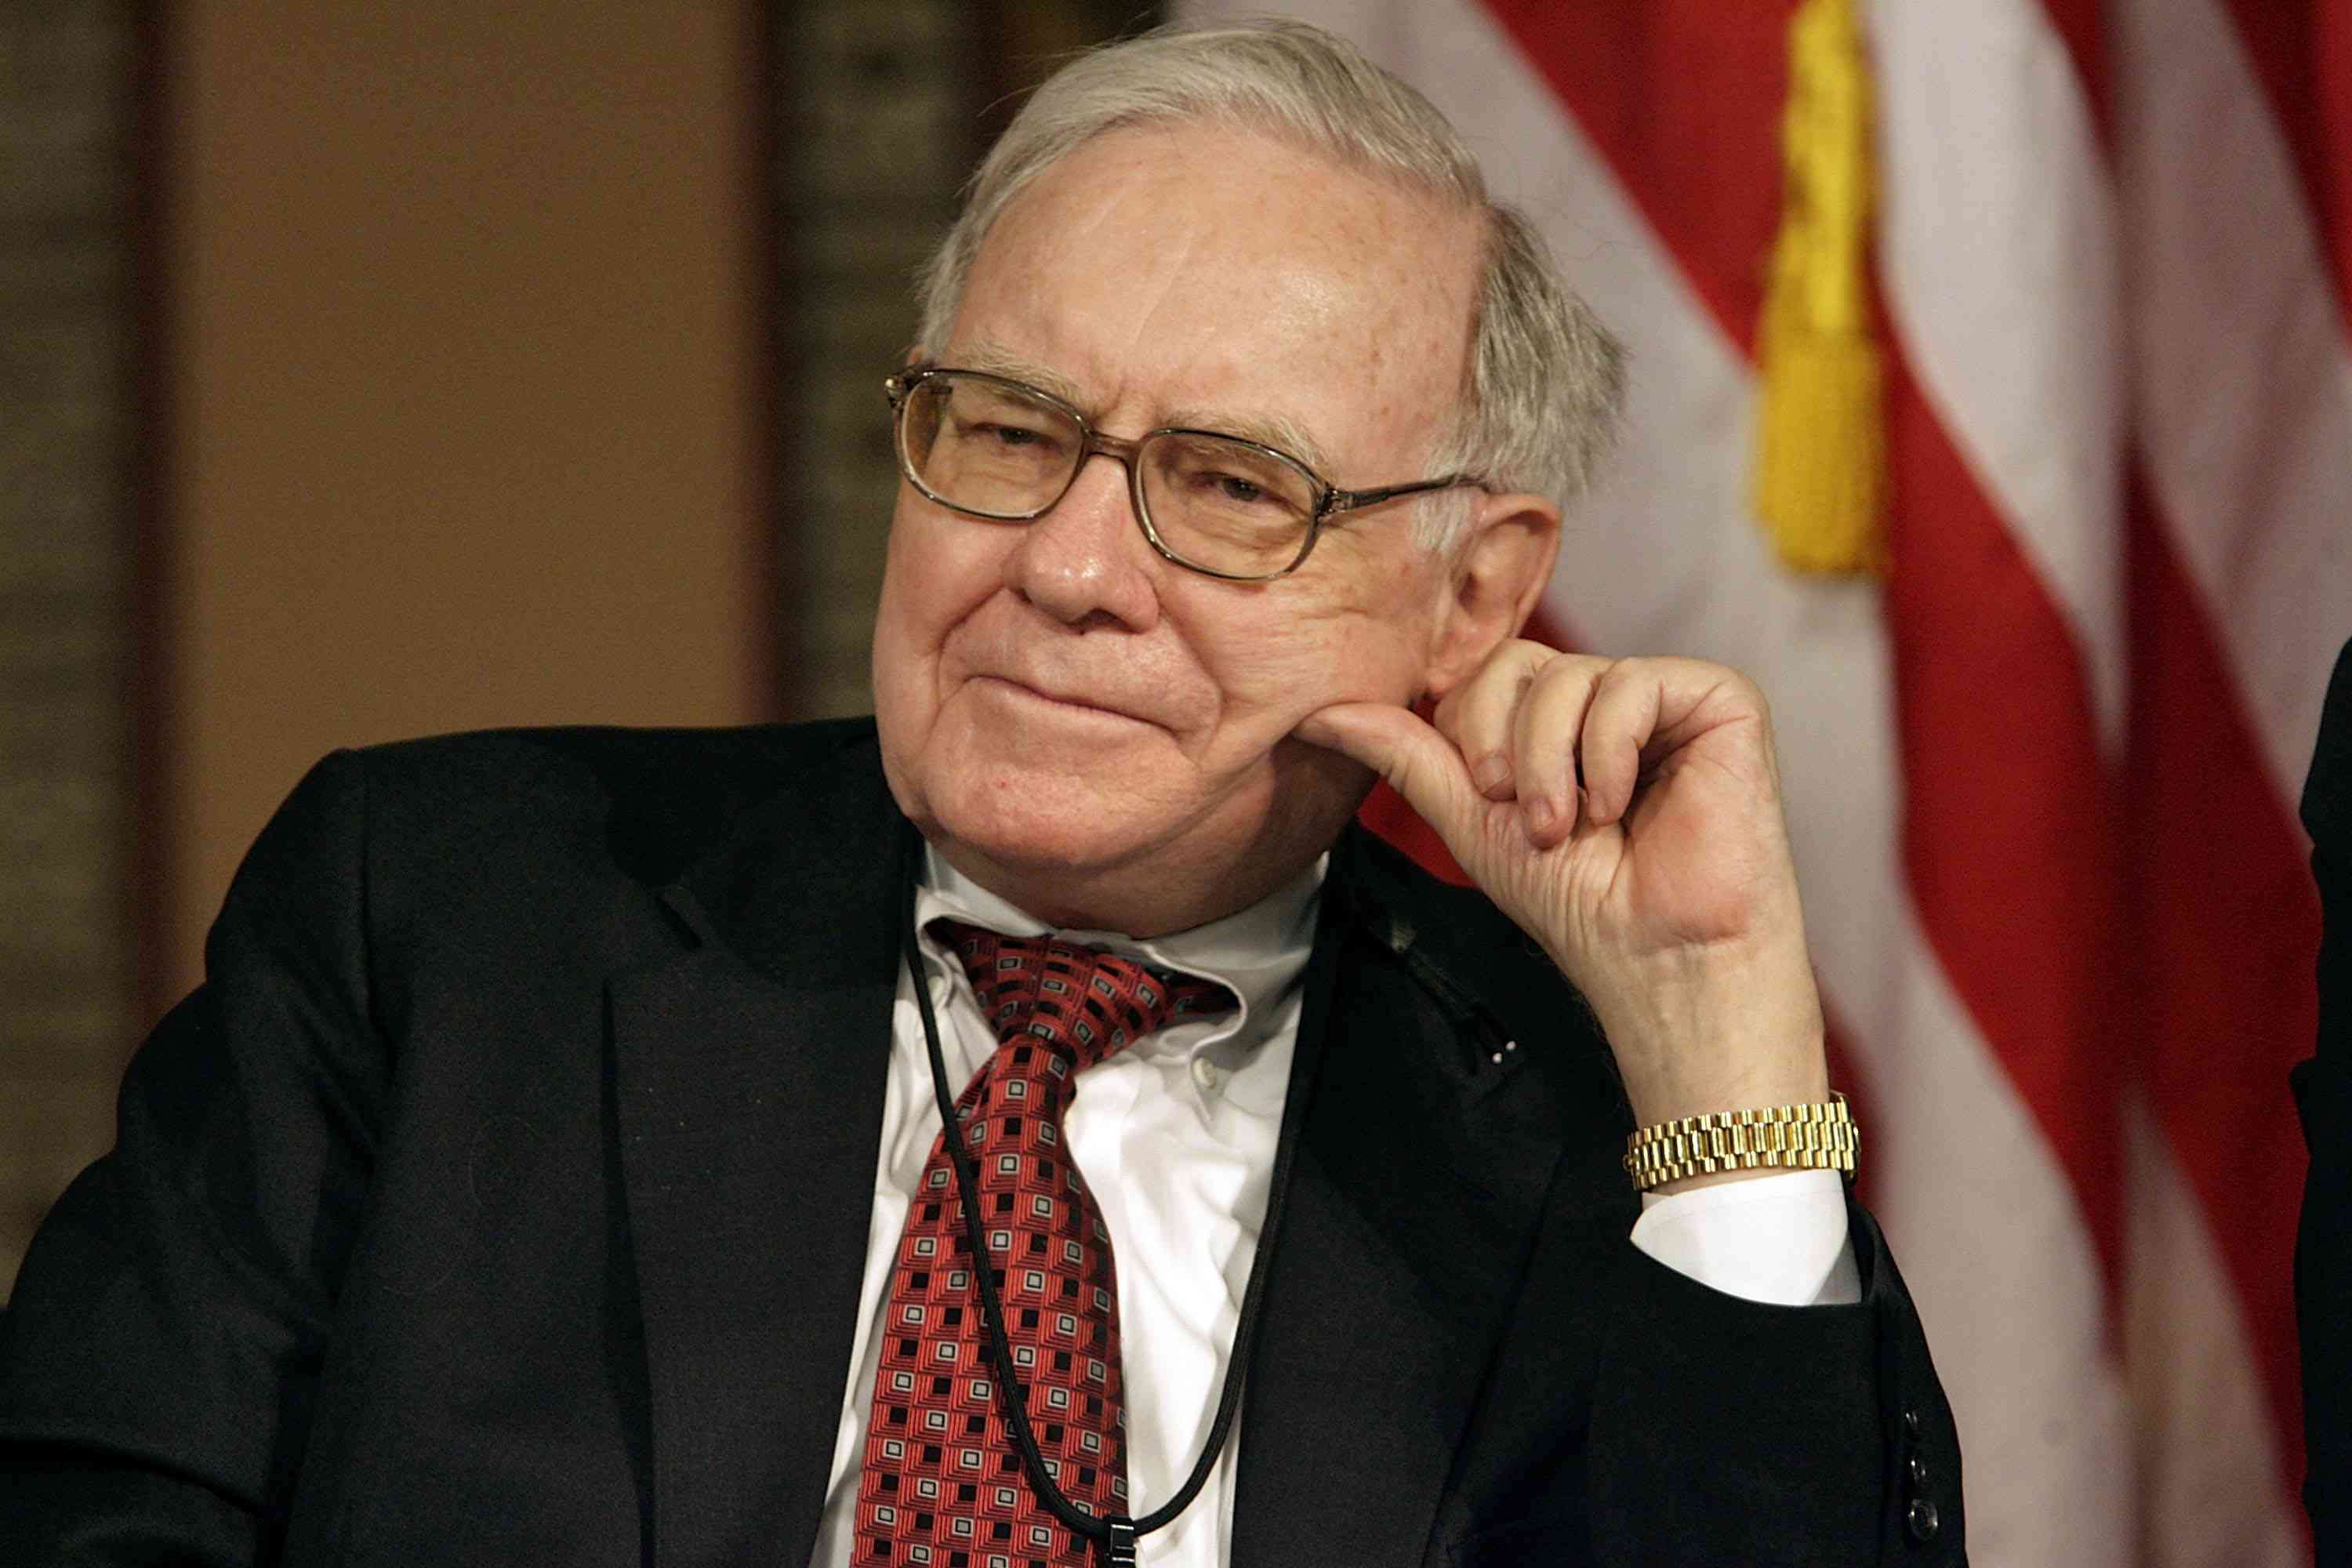 Warren Buffett, chairman and CEO of Berkshire Hathaway Inc., participates in a panel discussion